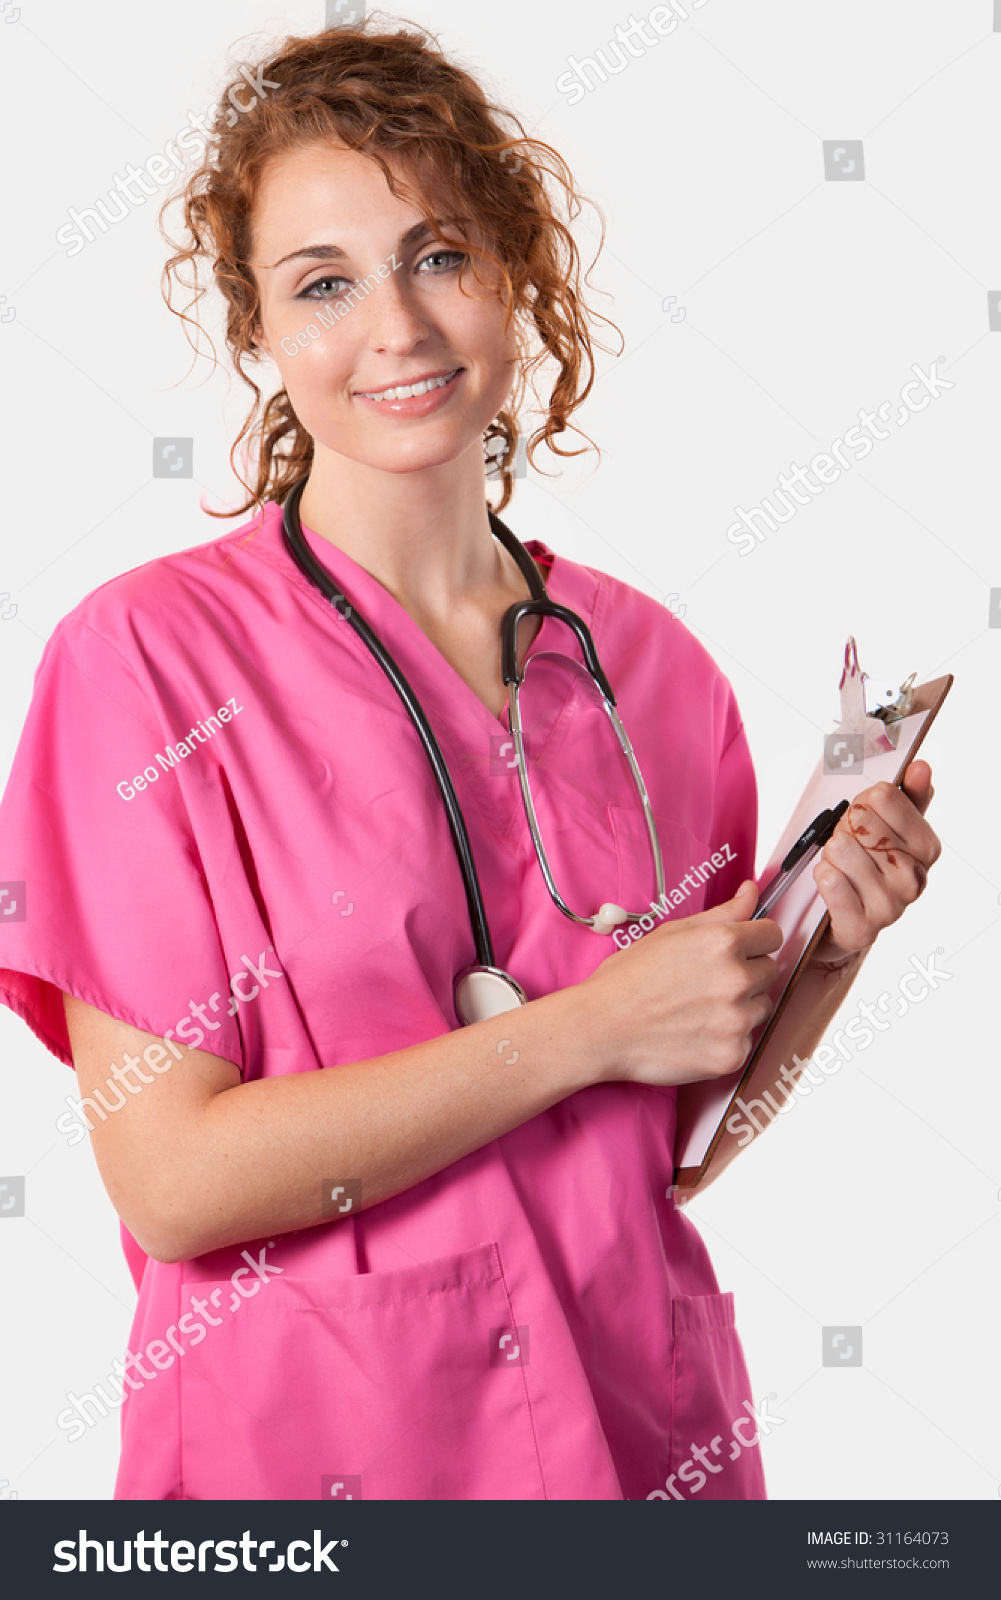 Attractive Friendly Smiling Curly Hair Female Nurse In